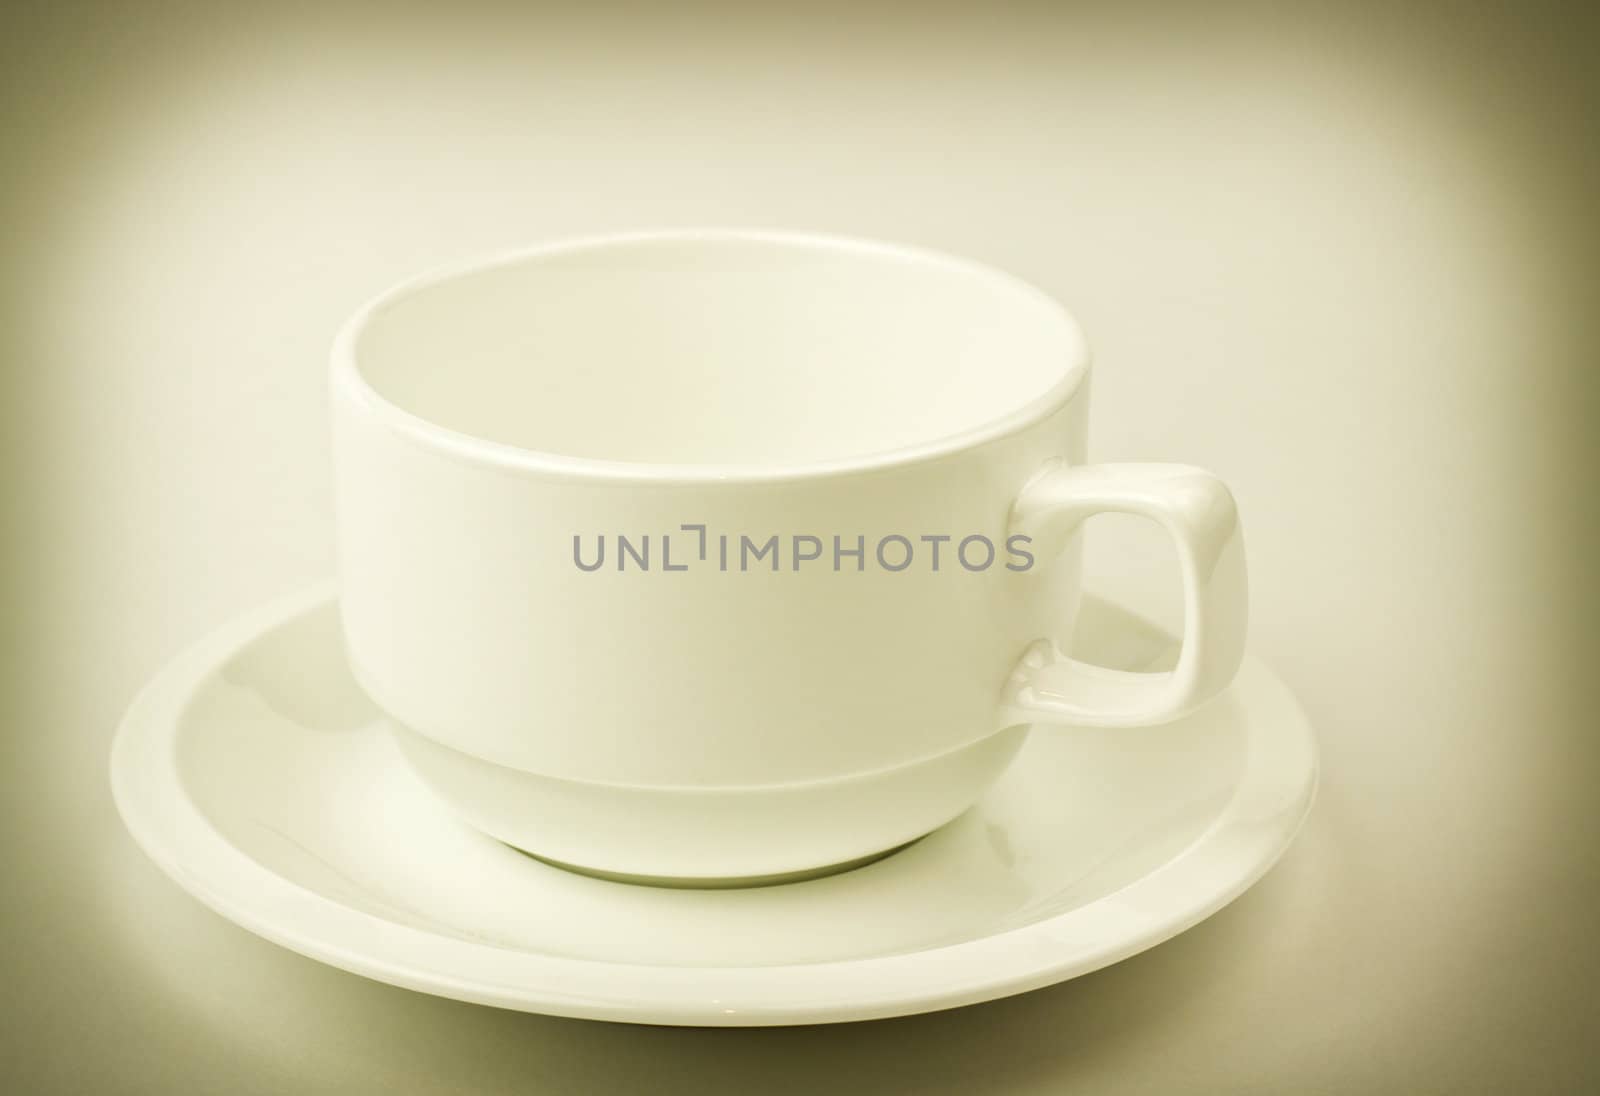 fine retro style image of white cup for coffee or tea